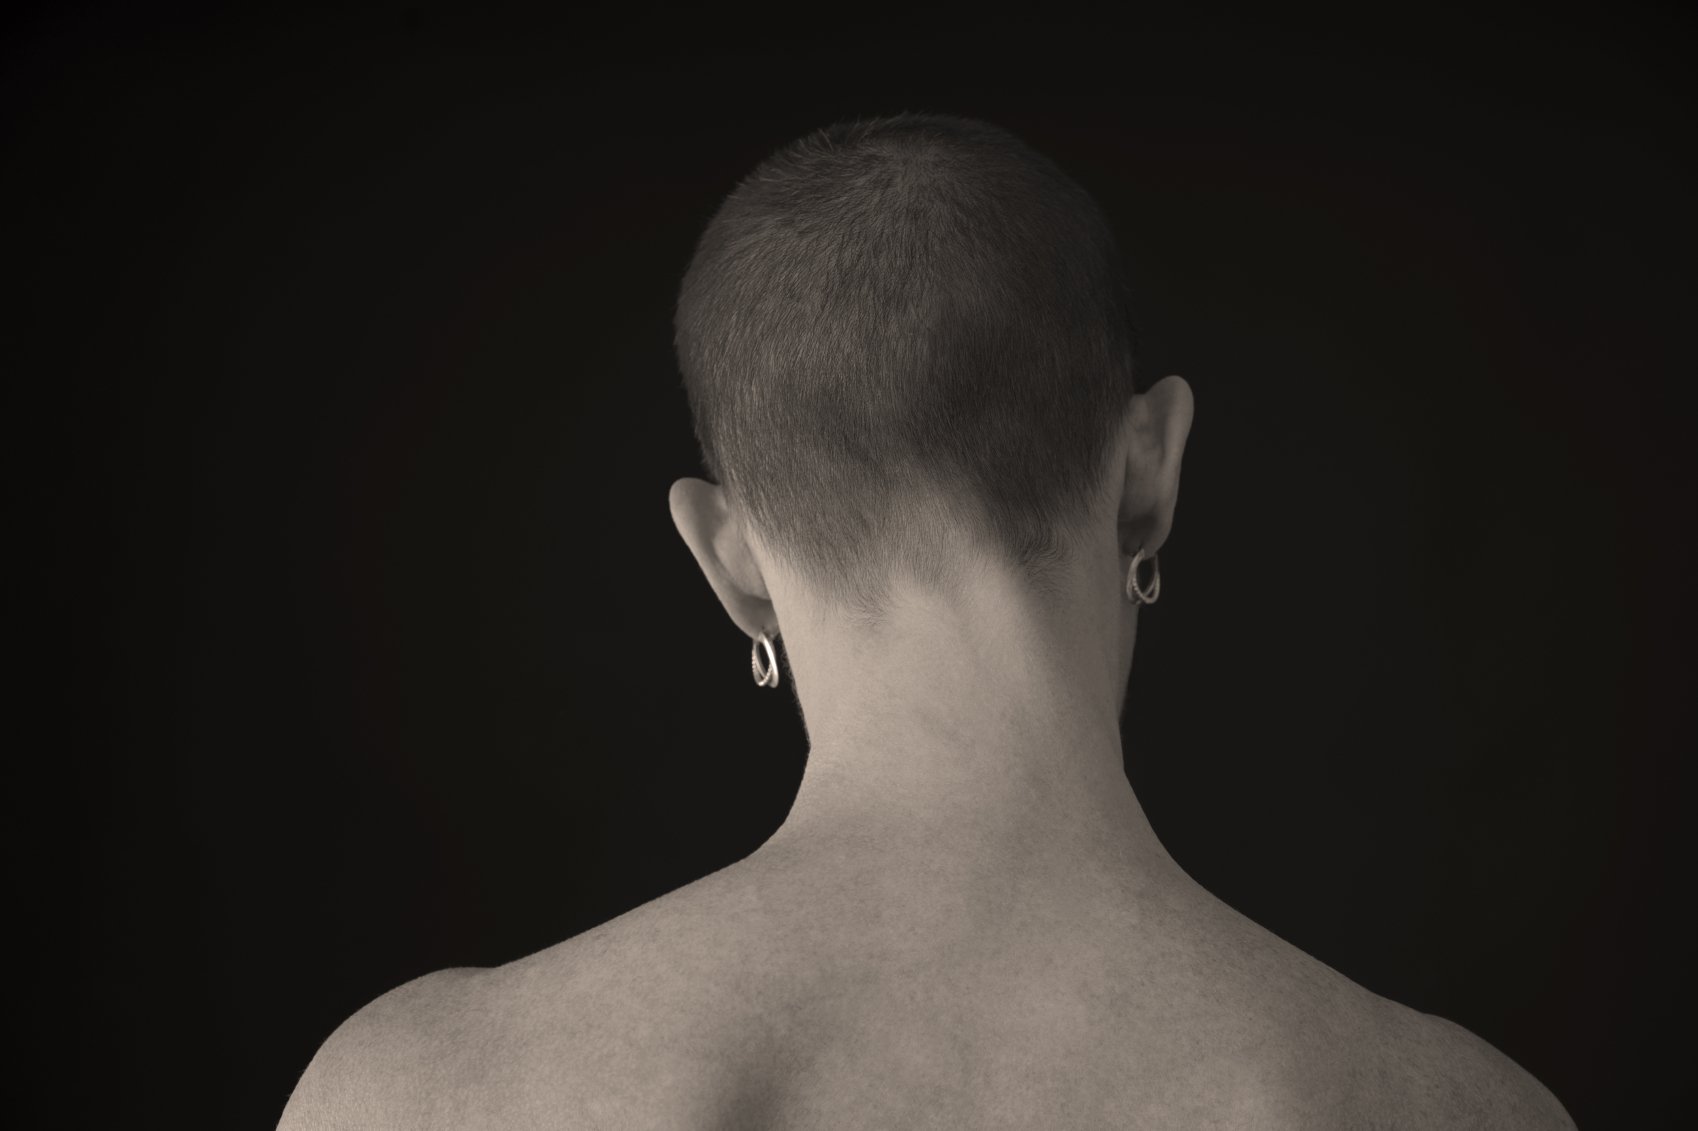 Bald Nude Woman With Cancer, Facing Away From The Camera